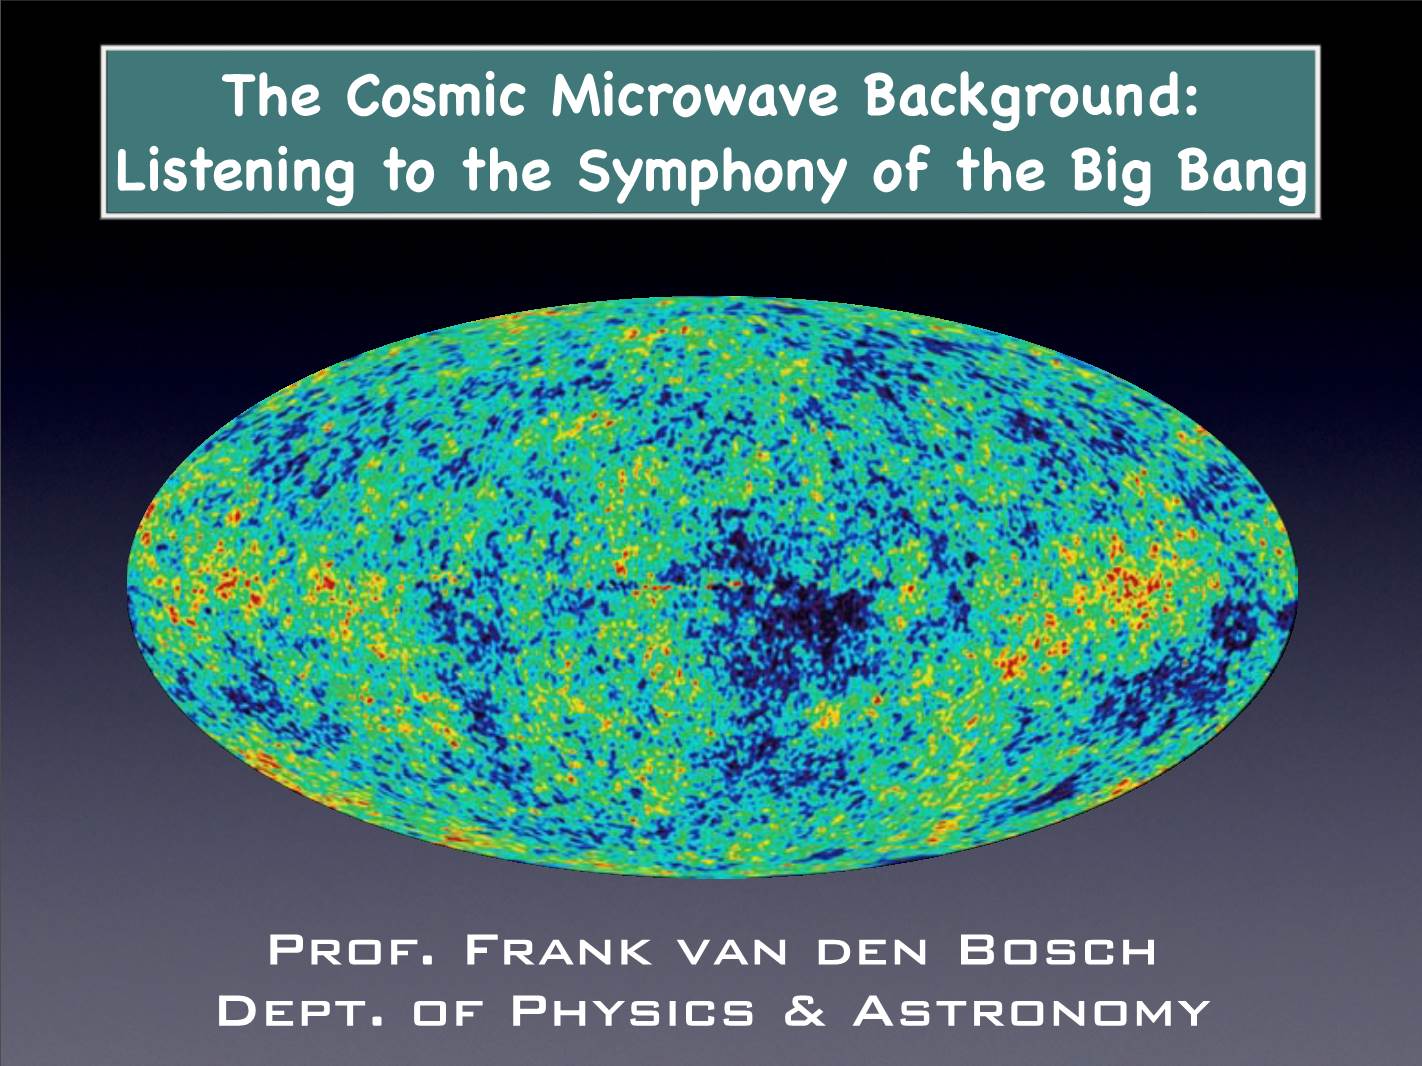 The Cosmic Microwave Background: Listening to the Symphony of the Big Bang